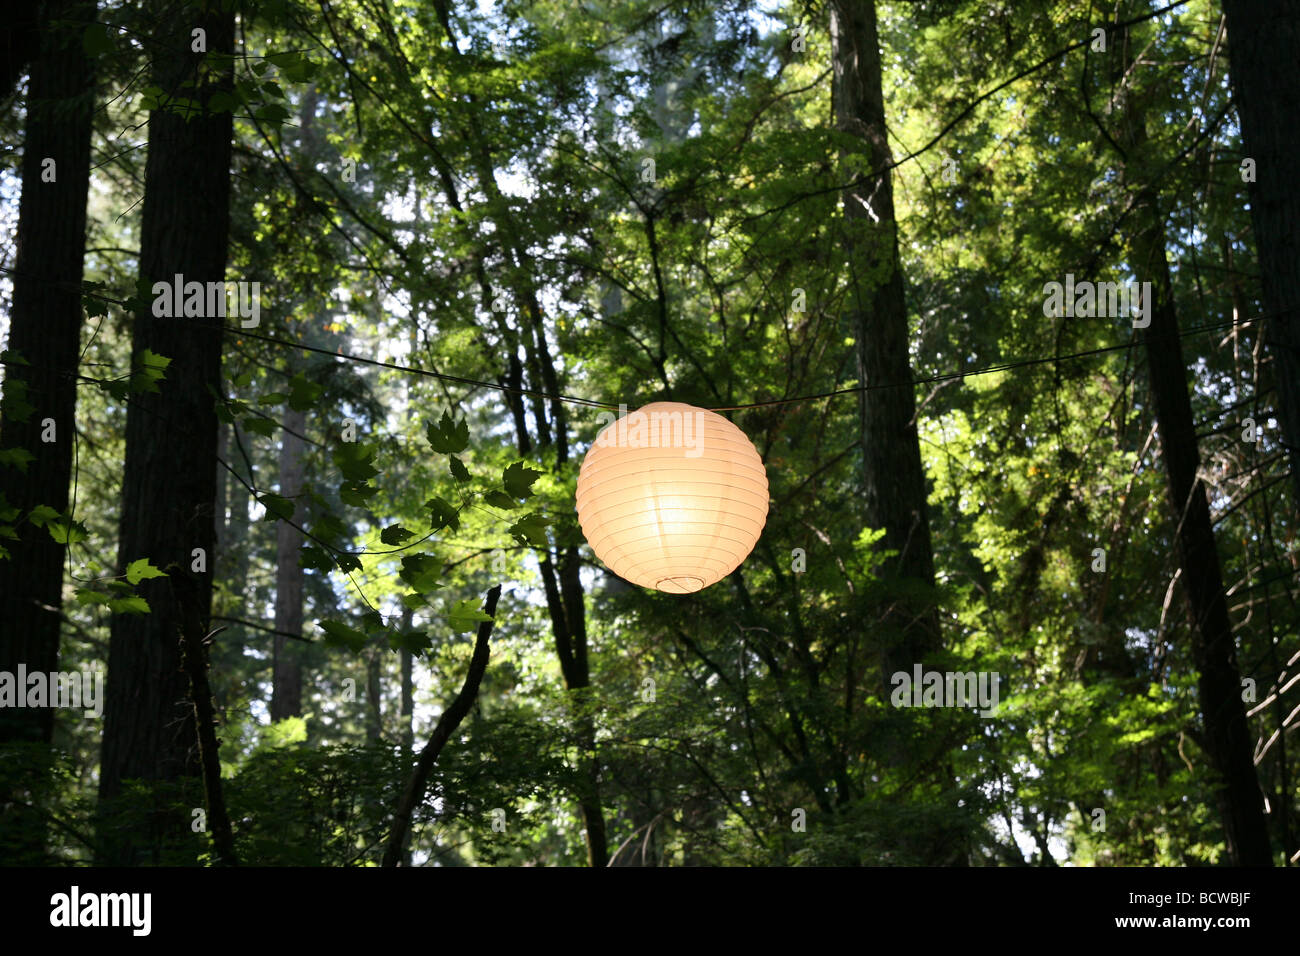 A paper lantern hanging between two trees in a forest. Stock Photo